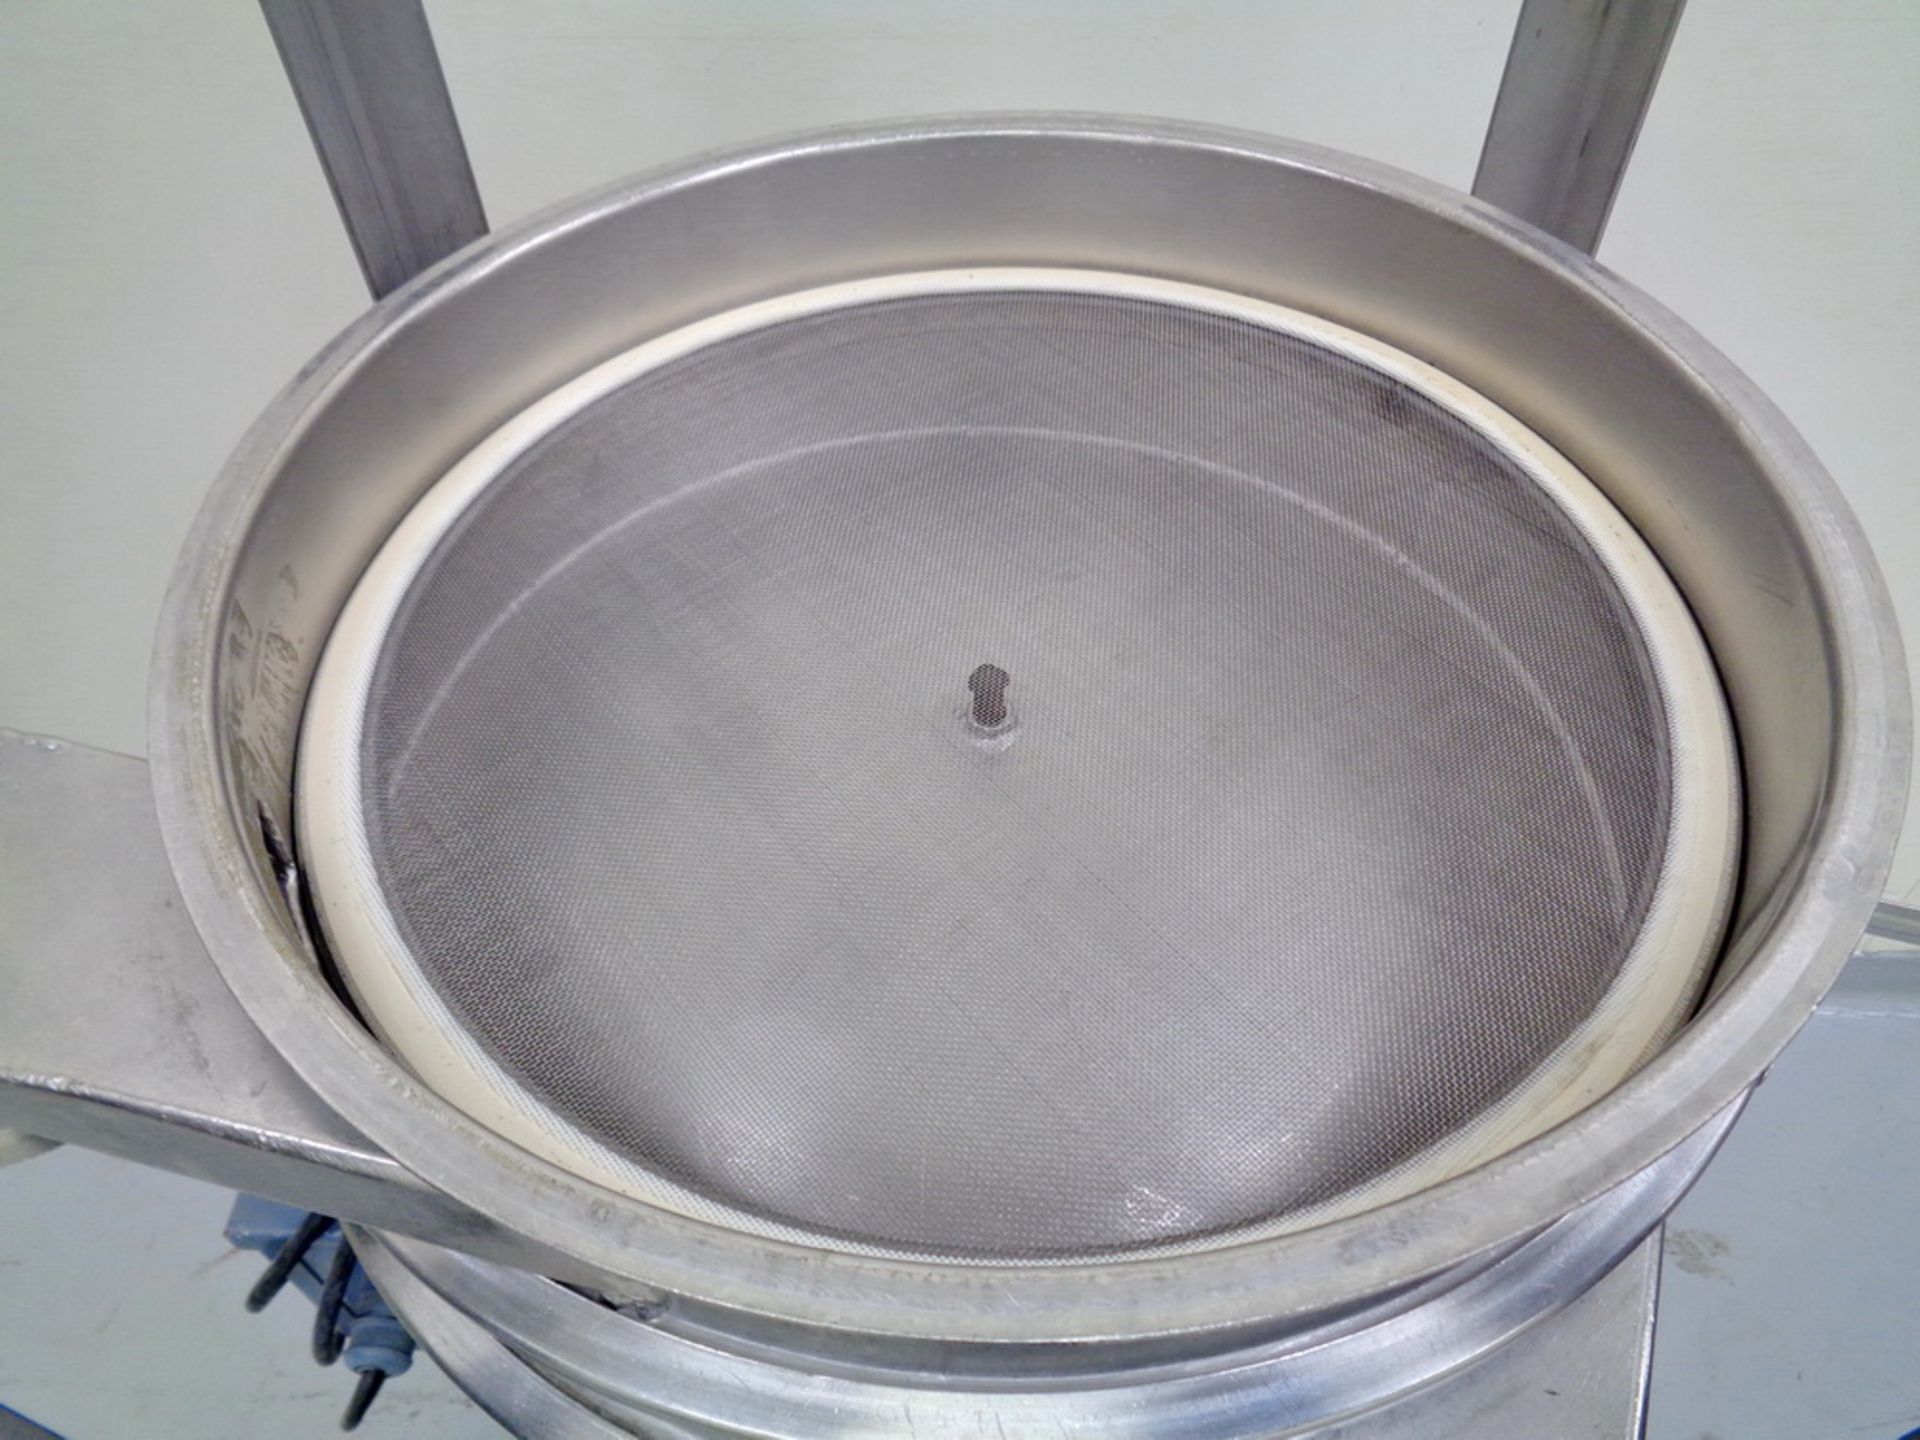 Sweco 18" Double Deck Stainless Steel Sifter, Model LS18S333, S/N LS18-275-37 - Image 3 of 6